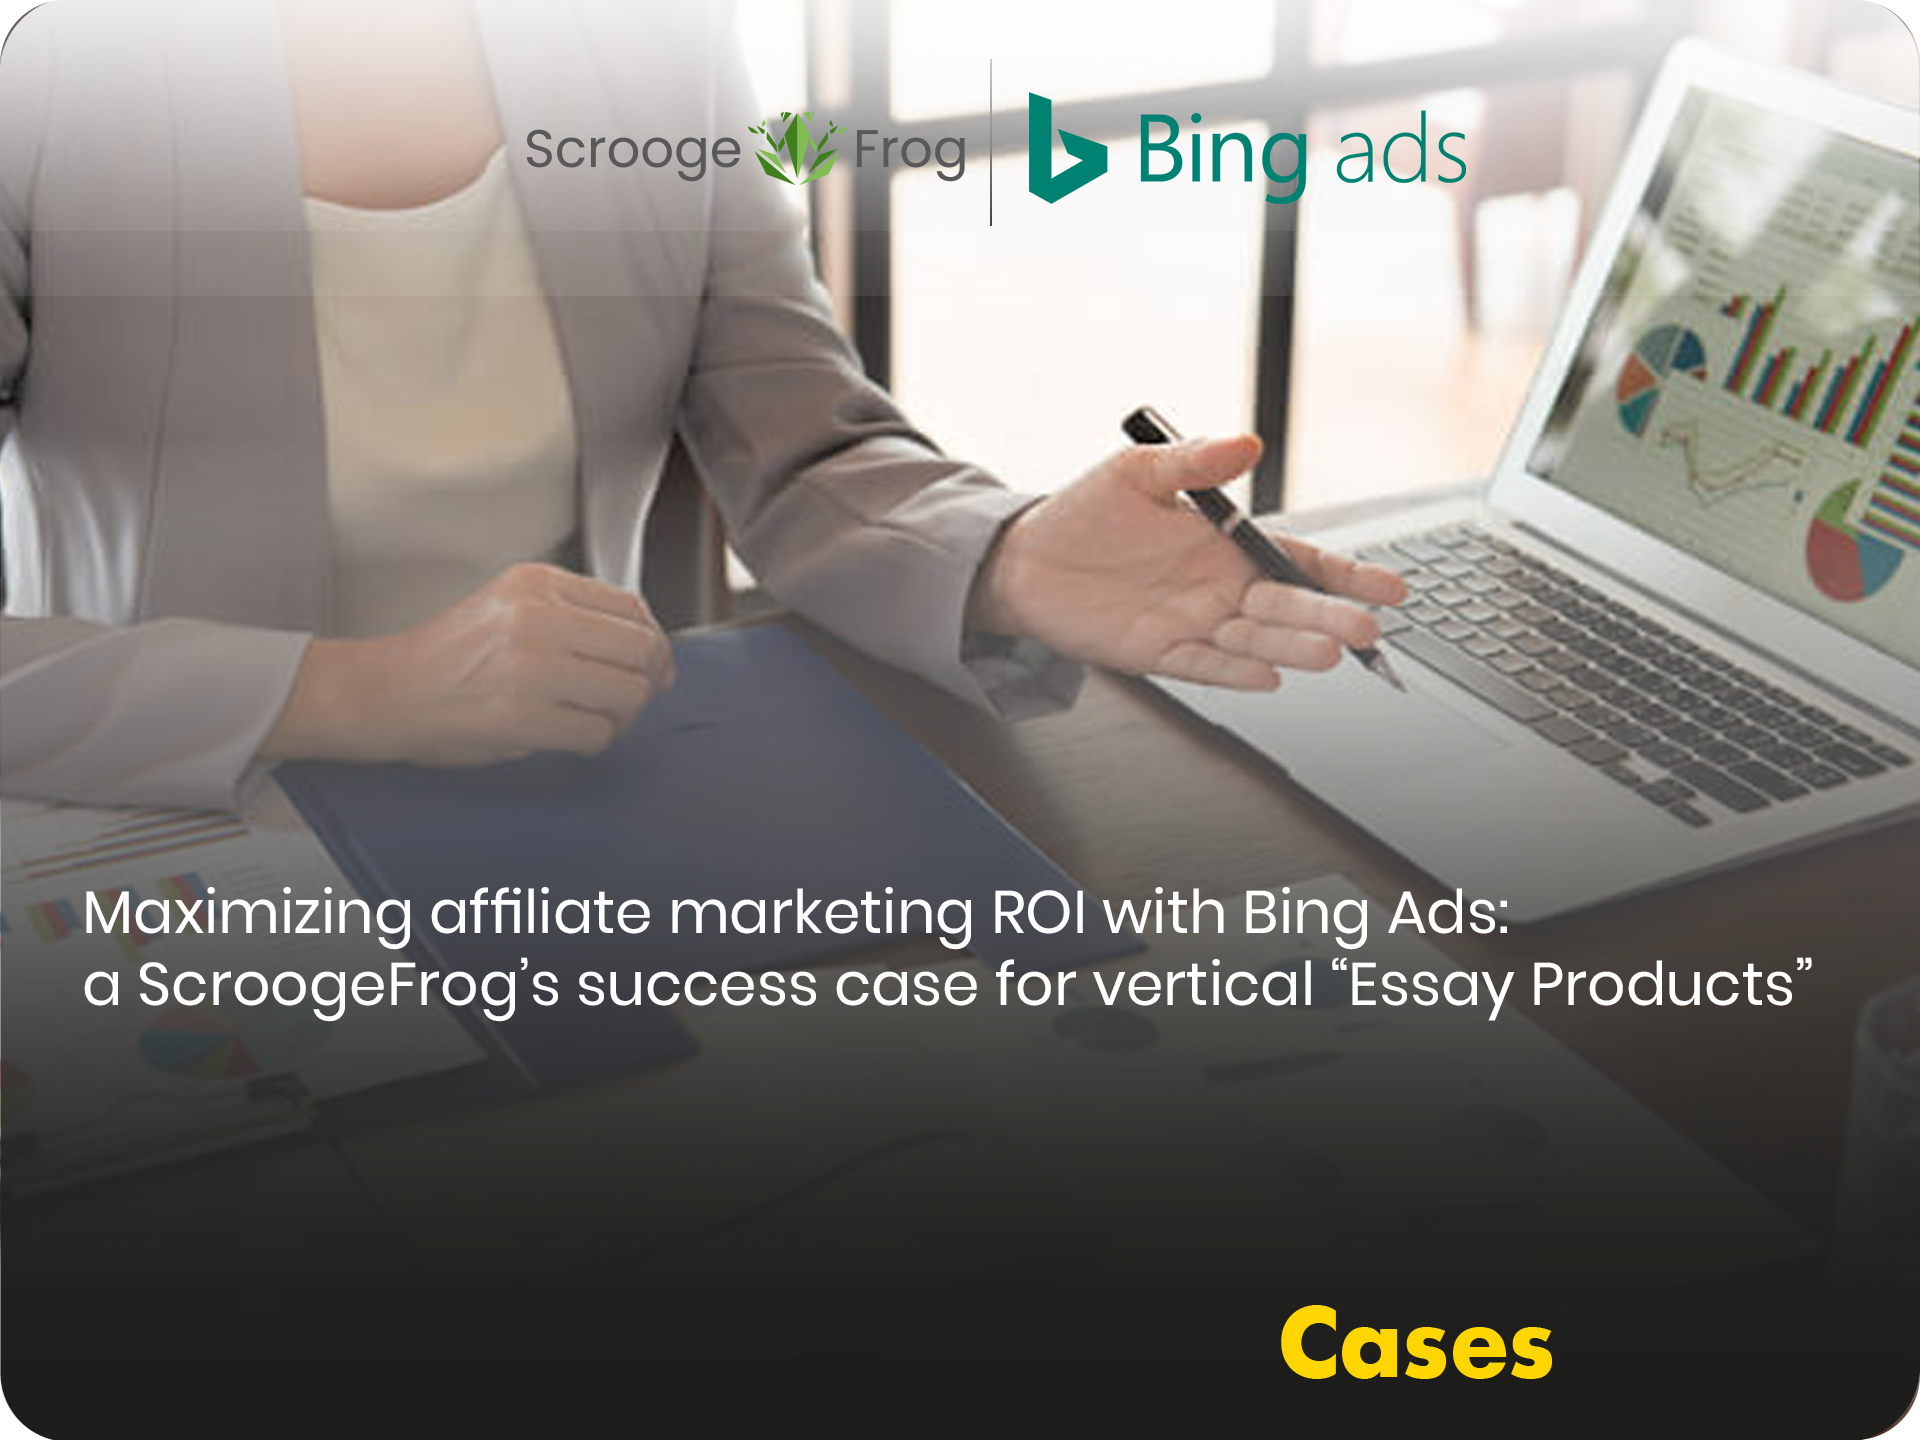 Maximizing affiliate marketing ROI with Bing Ads: a ScroogeFrog’s success case for vertical “Essay Products”